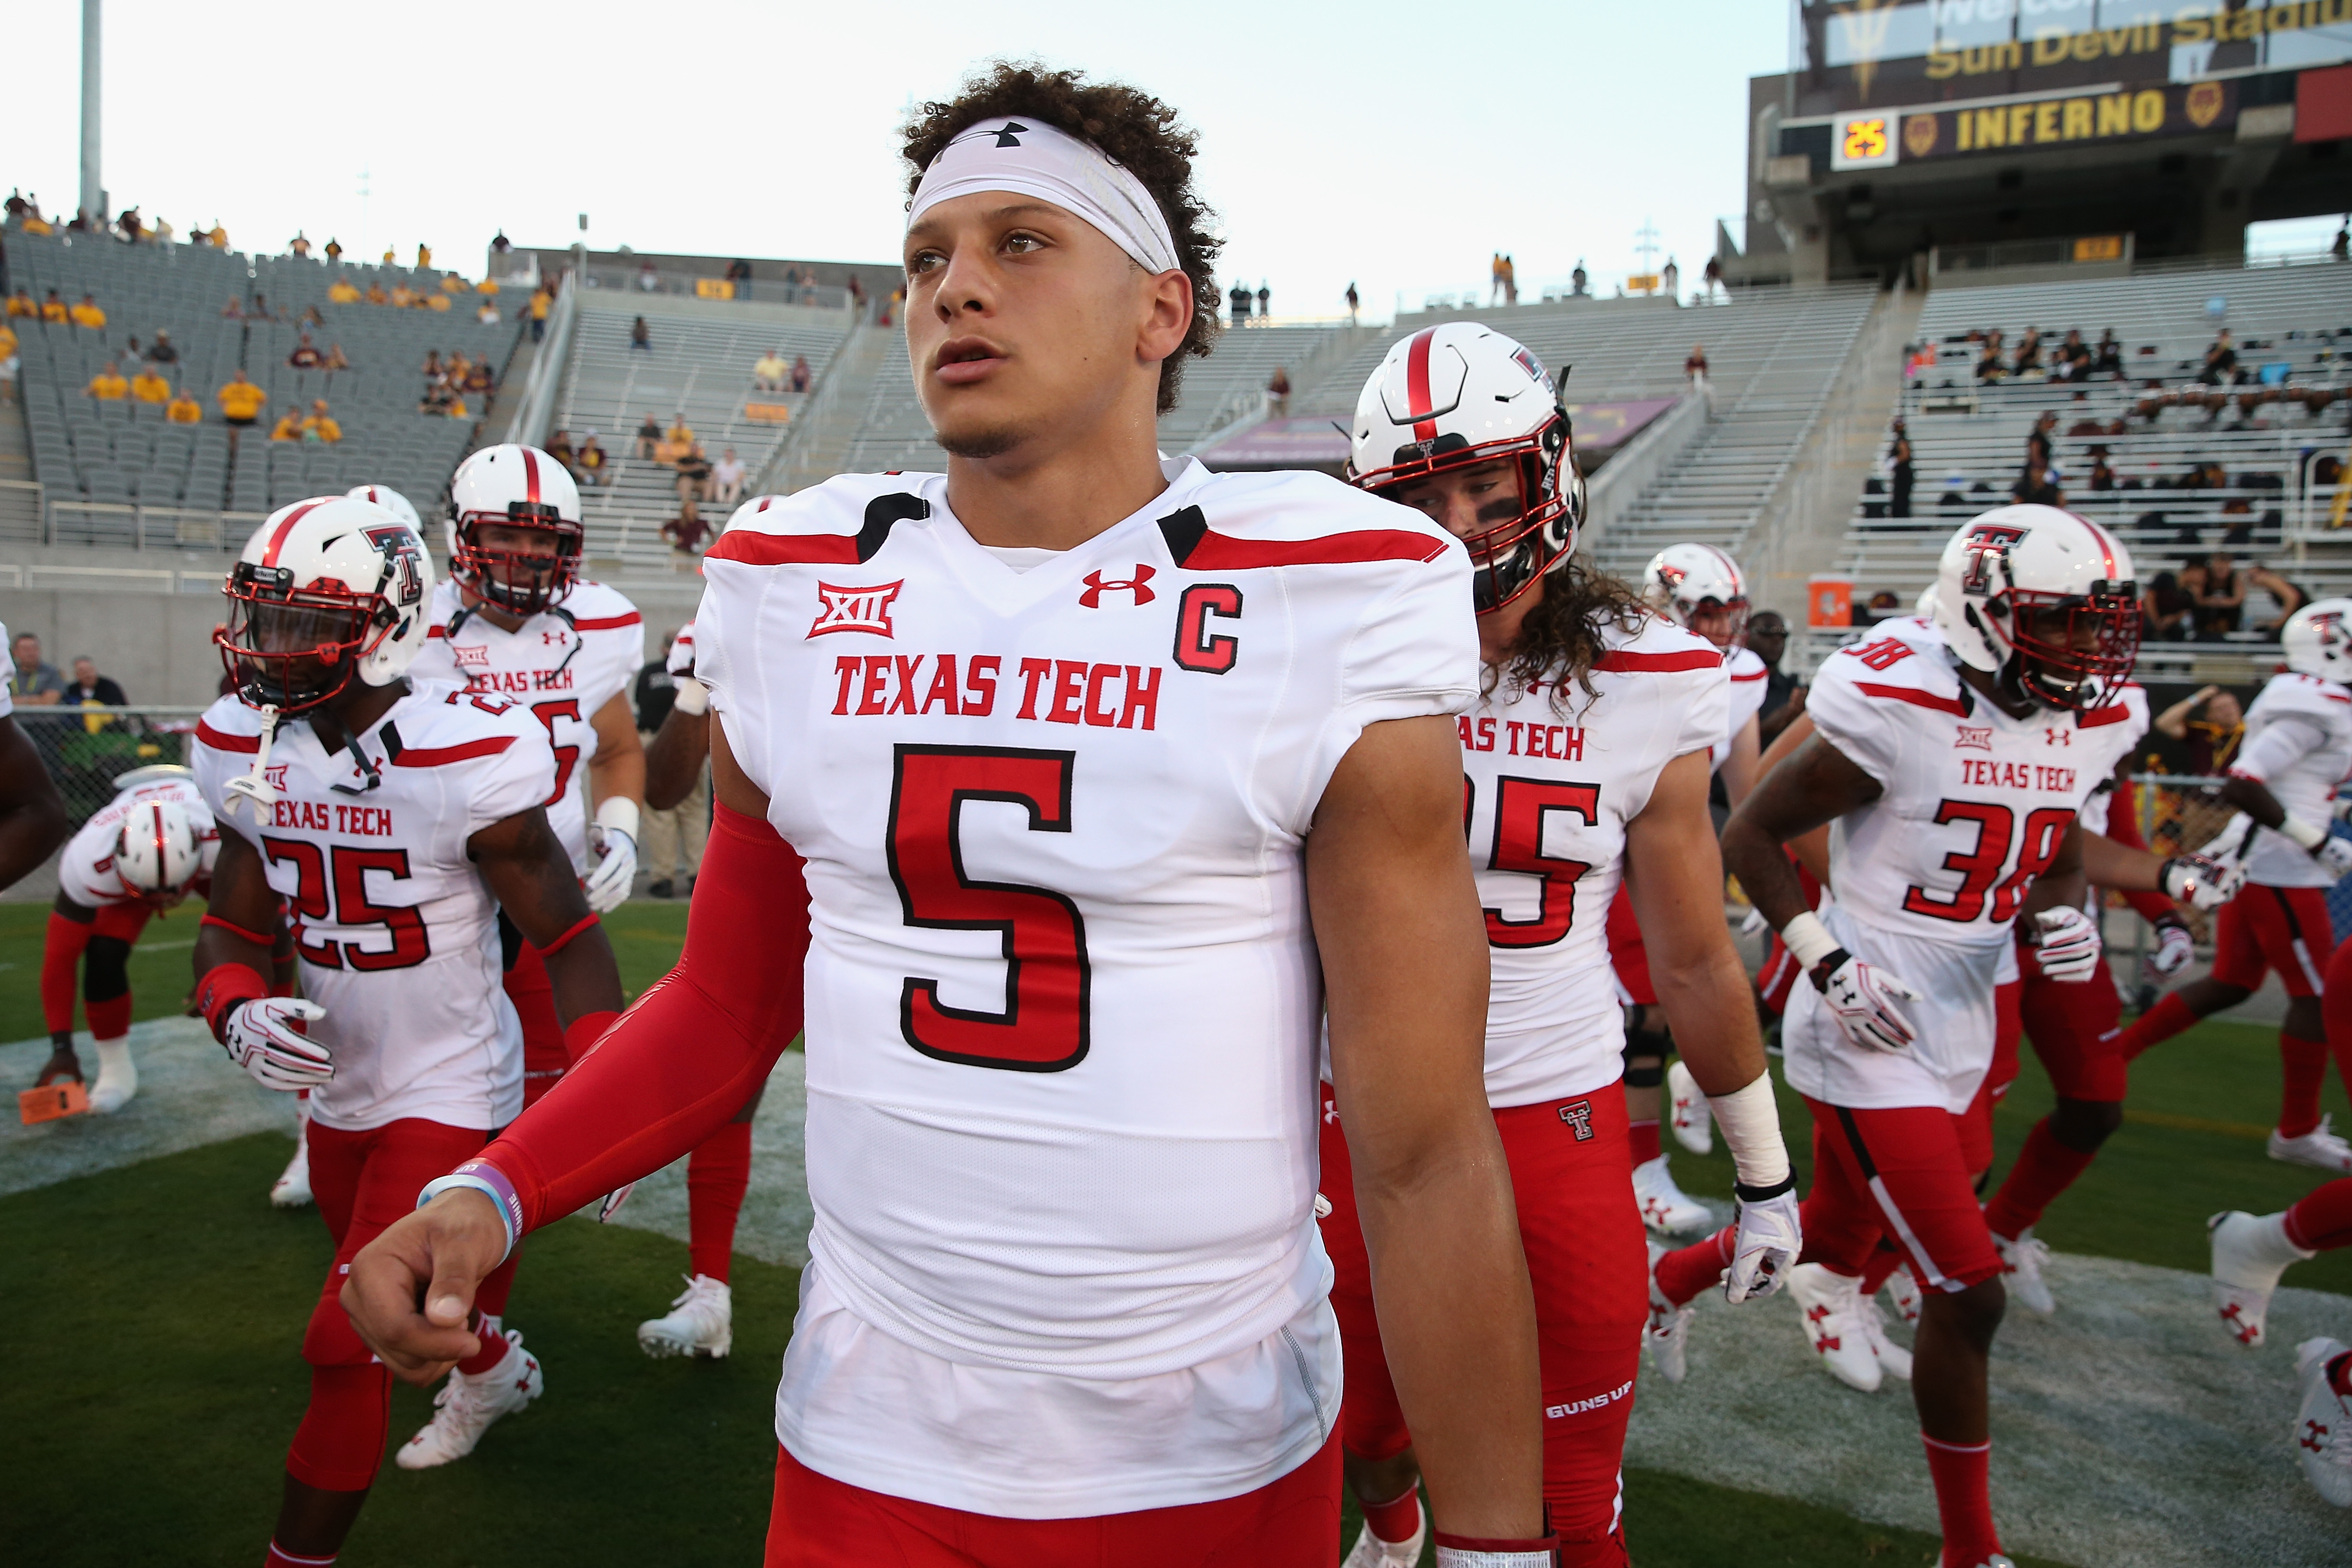 Mahomes played for Texas Tech from 2014 until 2016